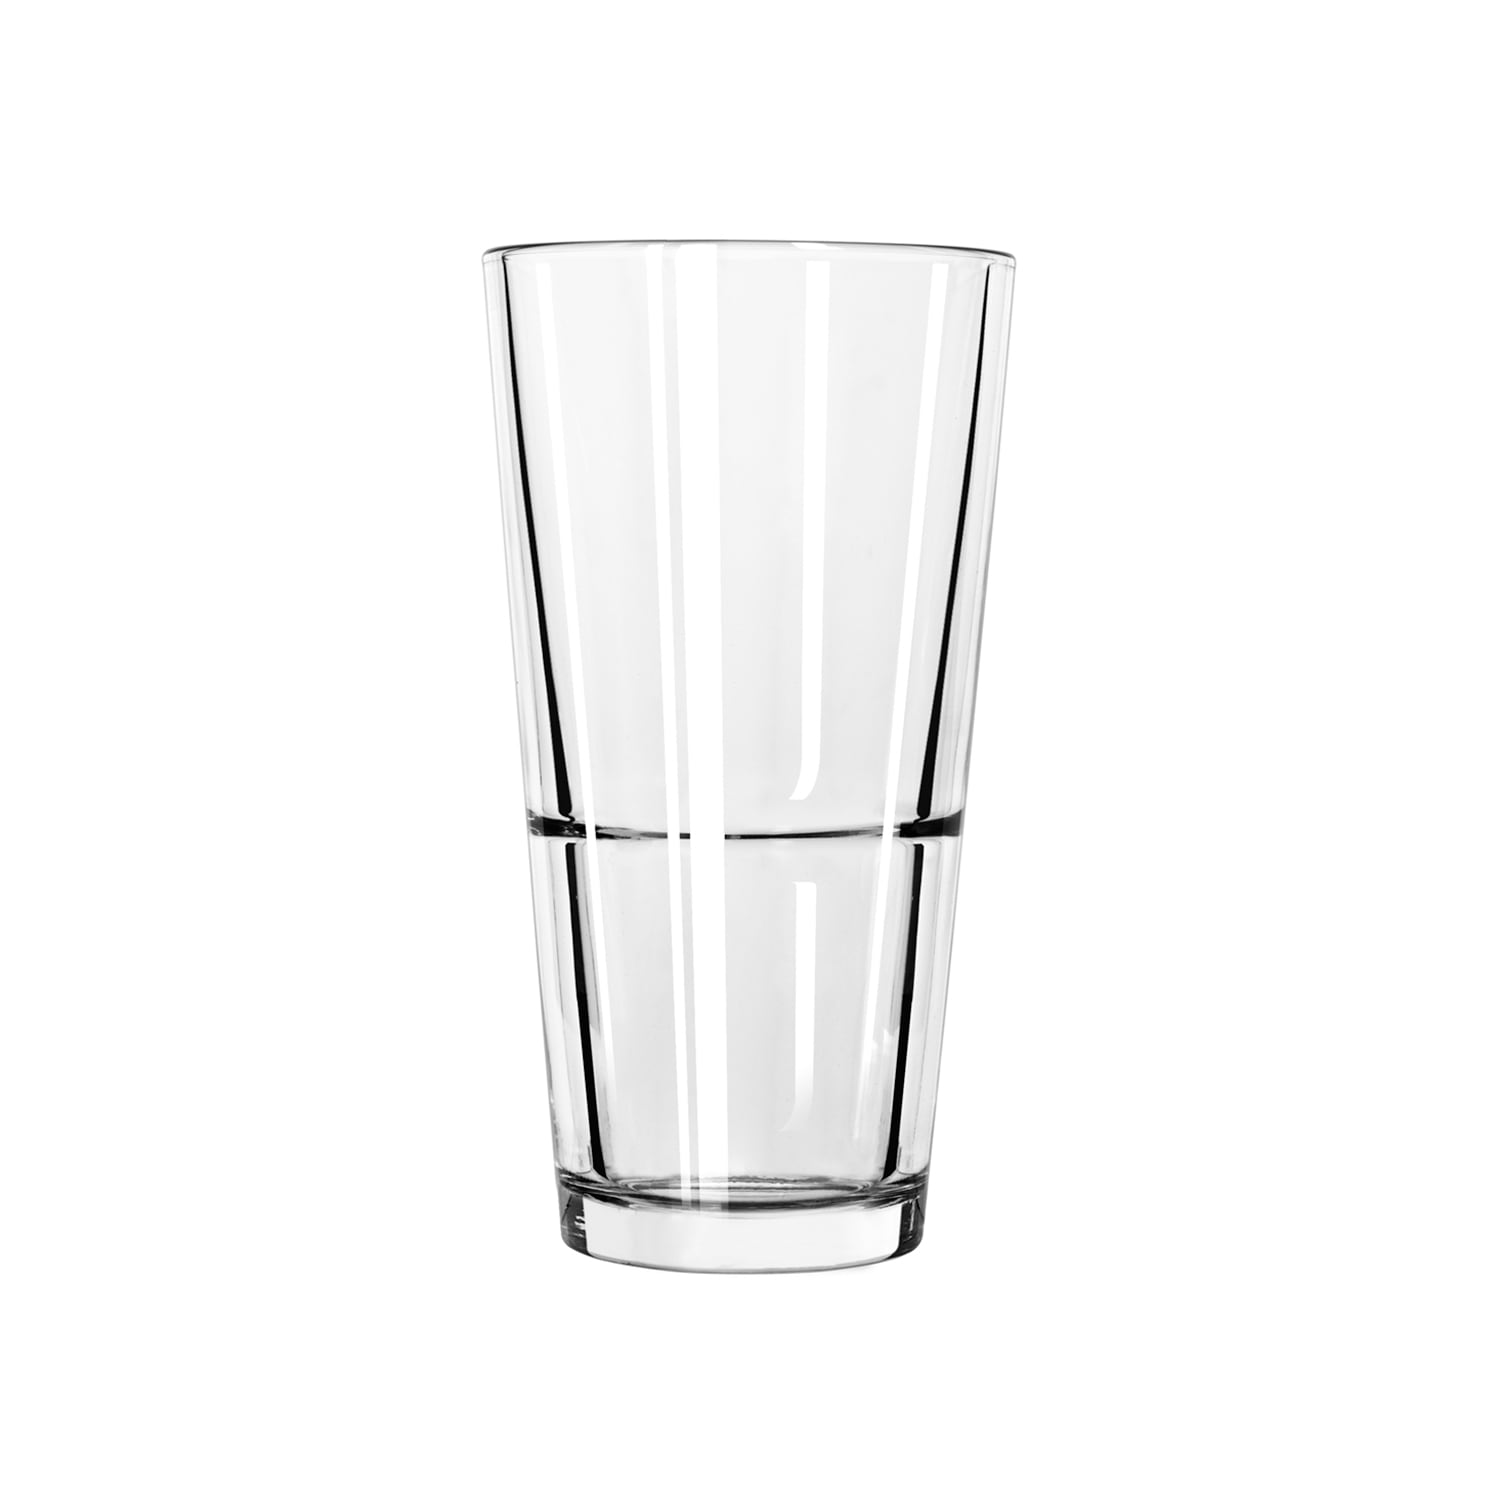 True crime Libbey Can Glass Full Wrap Beer glass (1920451)